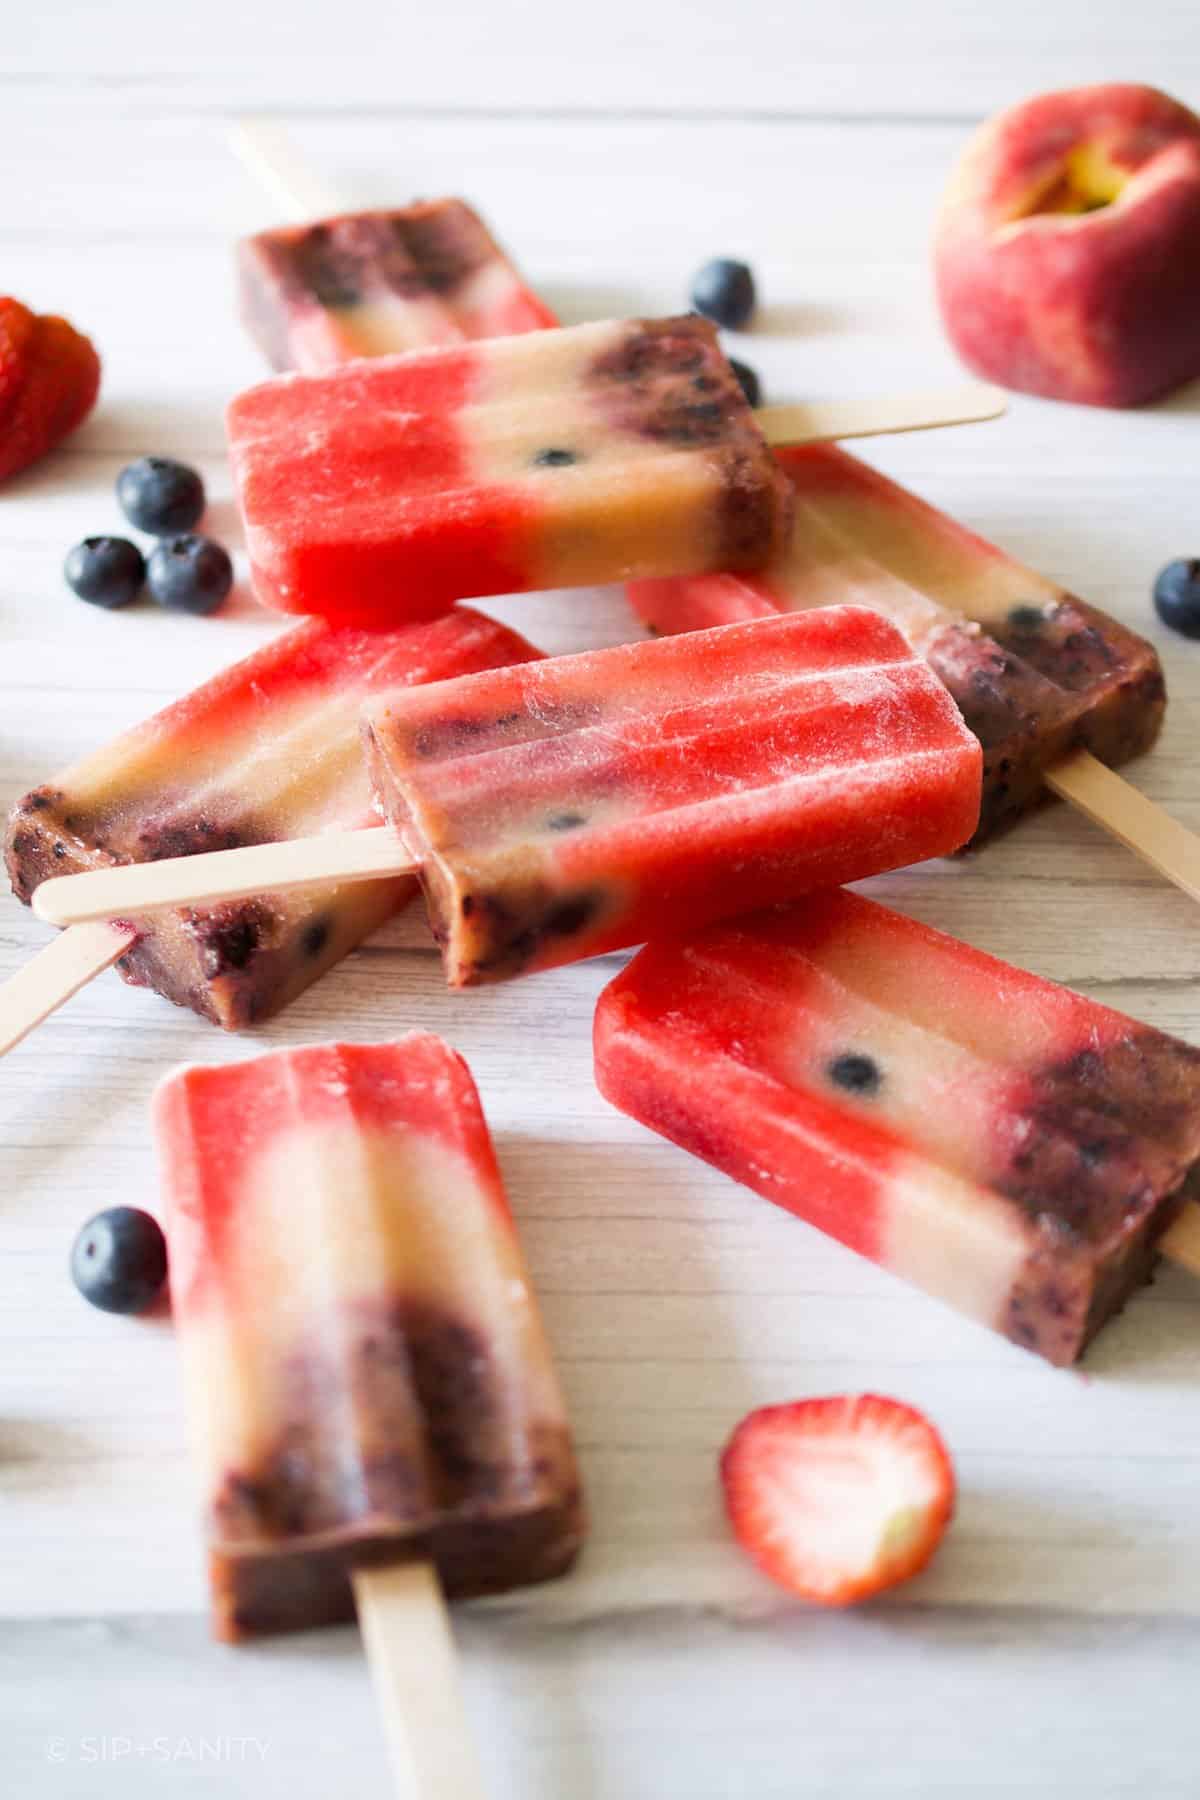 Red, white and blueberry popsicles scattered on a white wooden surface.